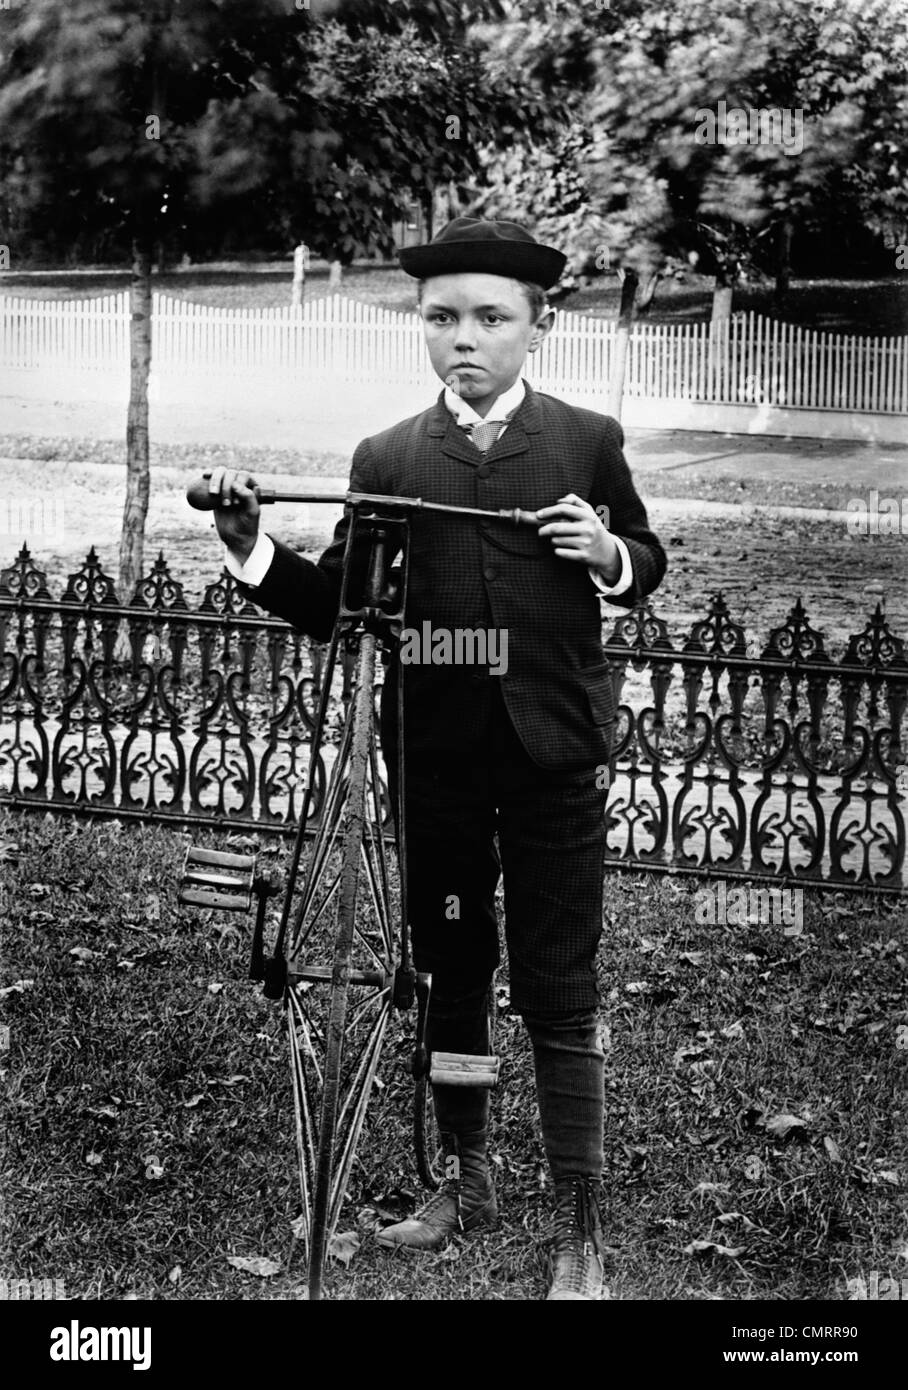 1800s 1890s 1900s TURN OF THE CENTURY BOY STANDING IN YARD NEXT TO OLD FASHIONED BICYCLE Stock Photo